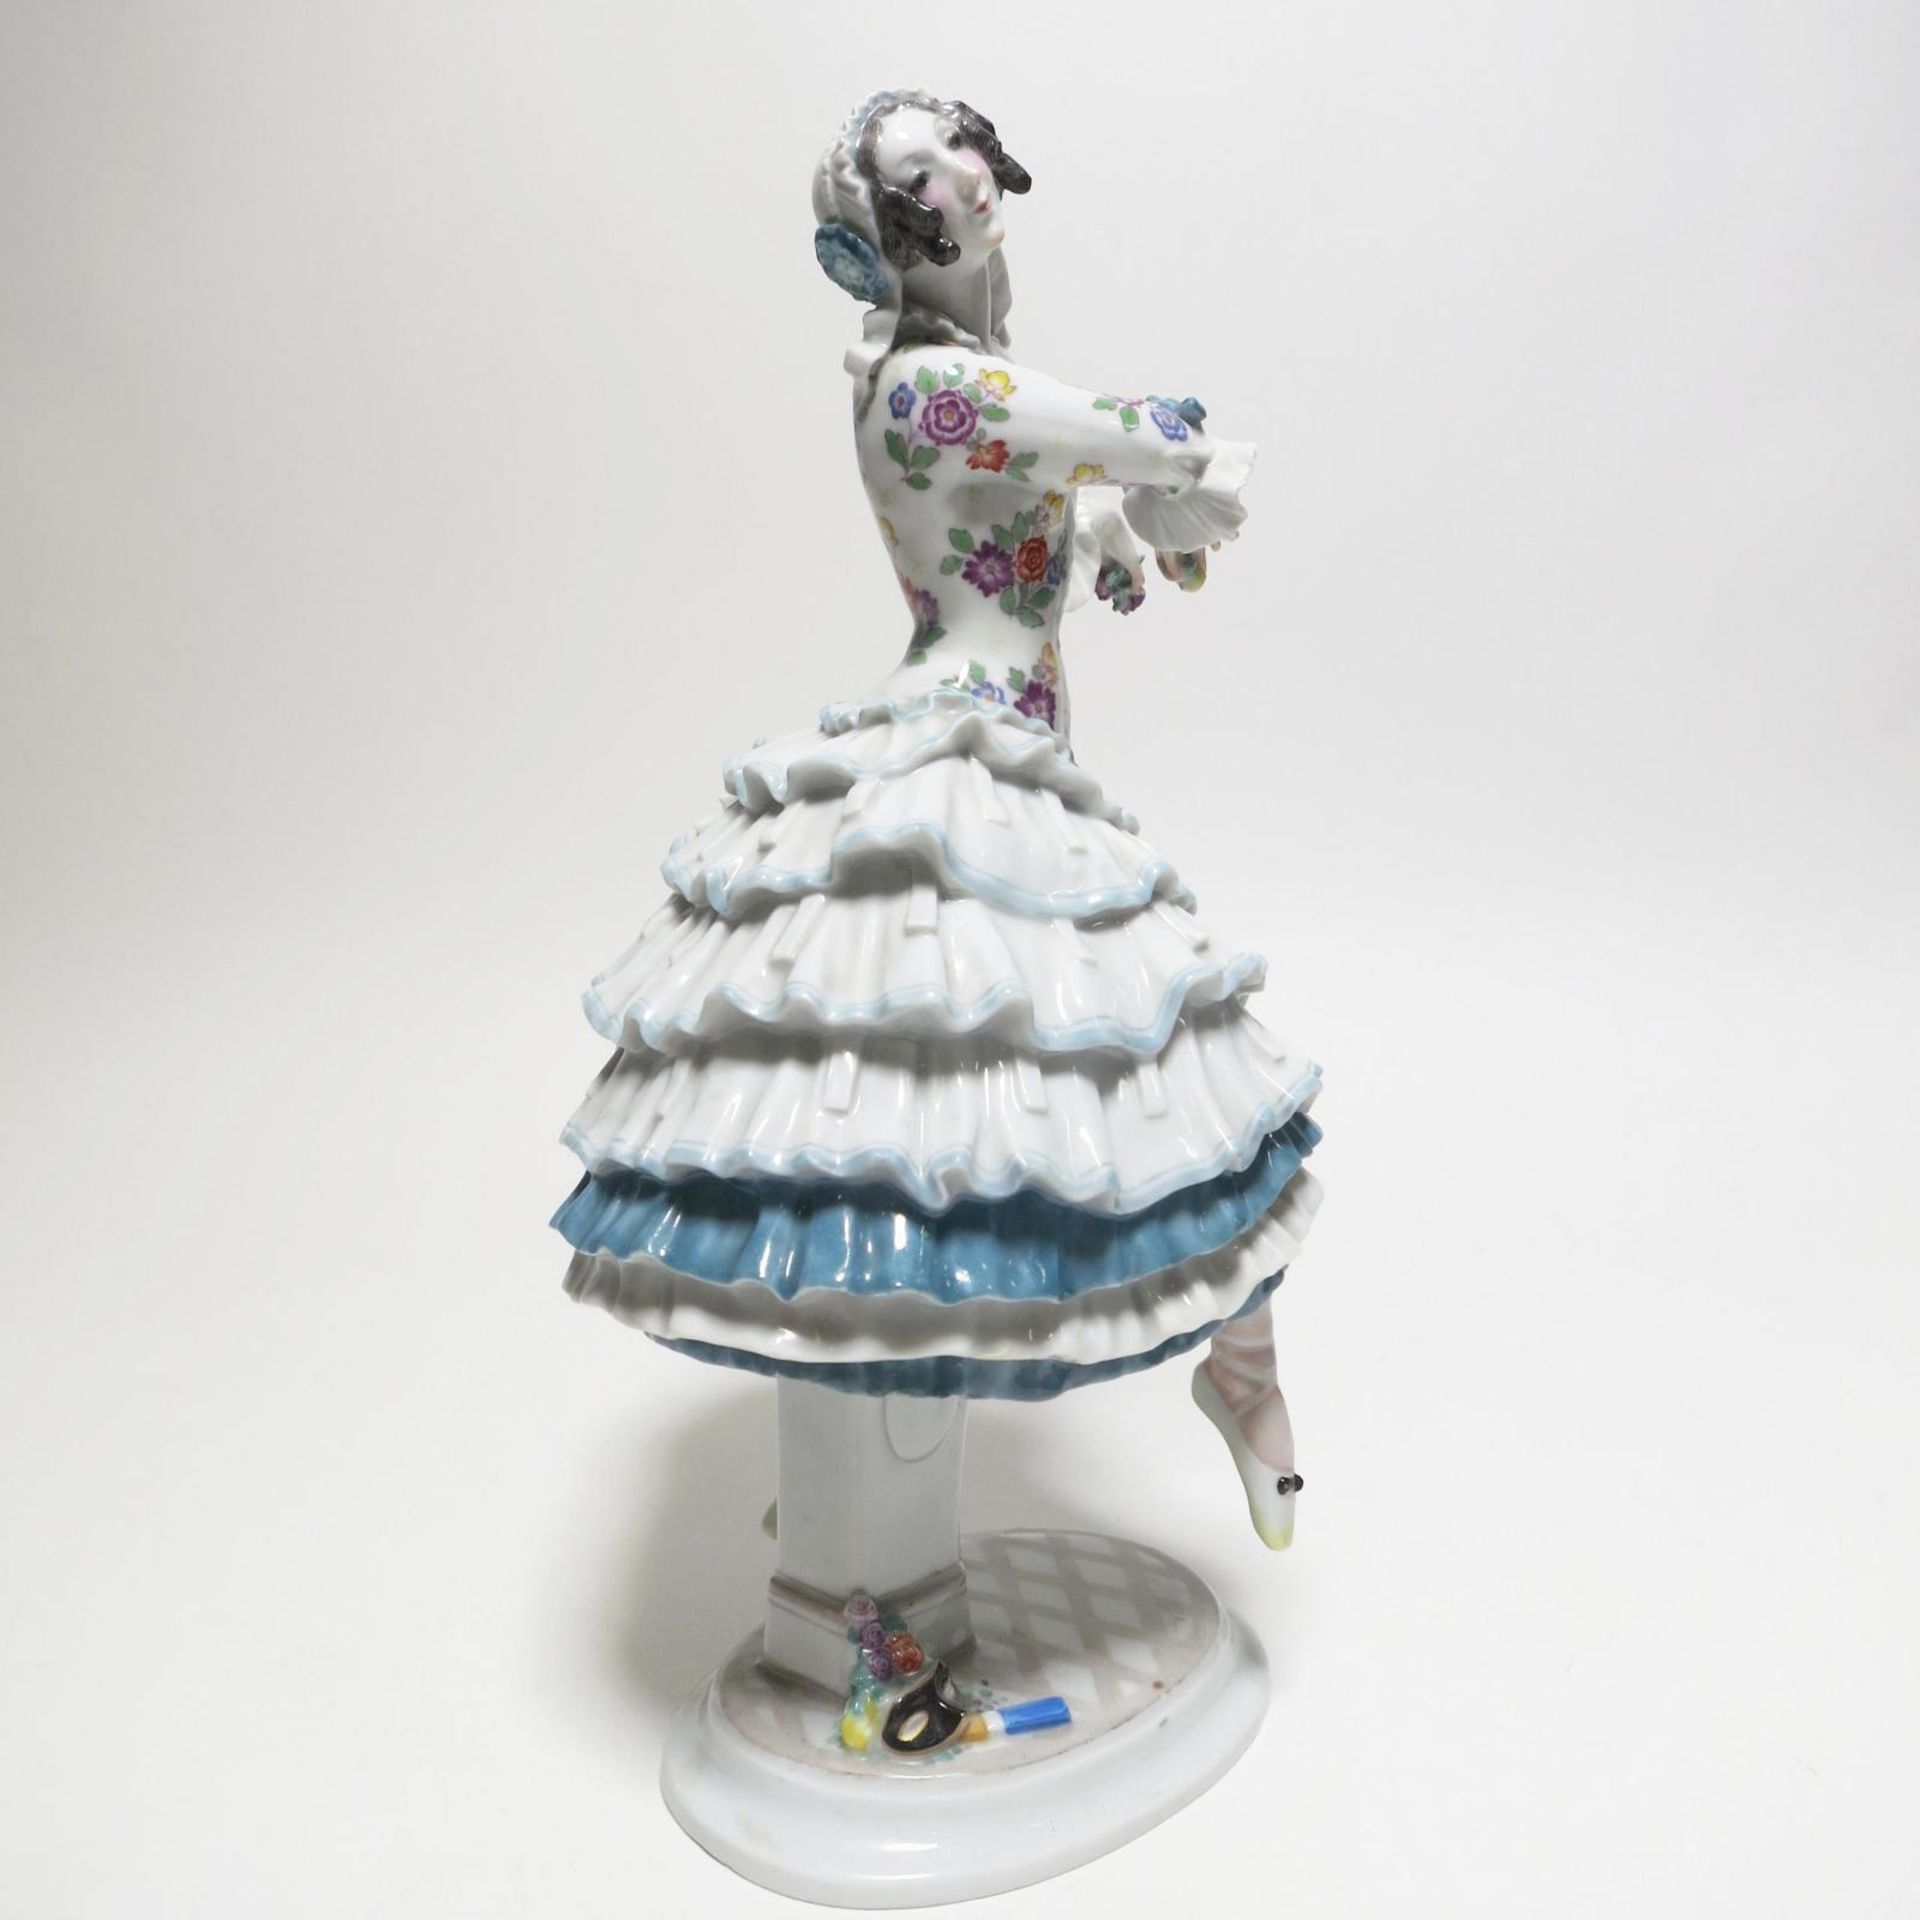 Meissen: PORCELAIN FIGURINES OF THE 'RUSSIAN BALLET' - Image 19 of 49